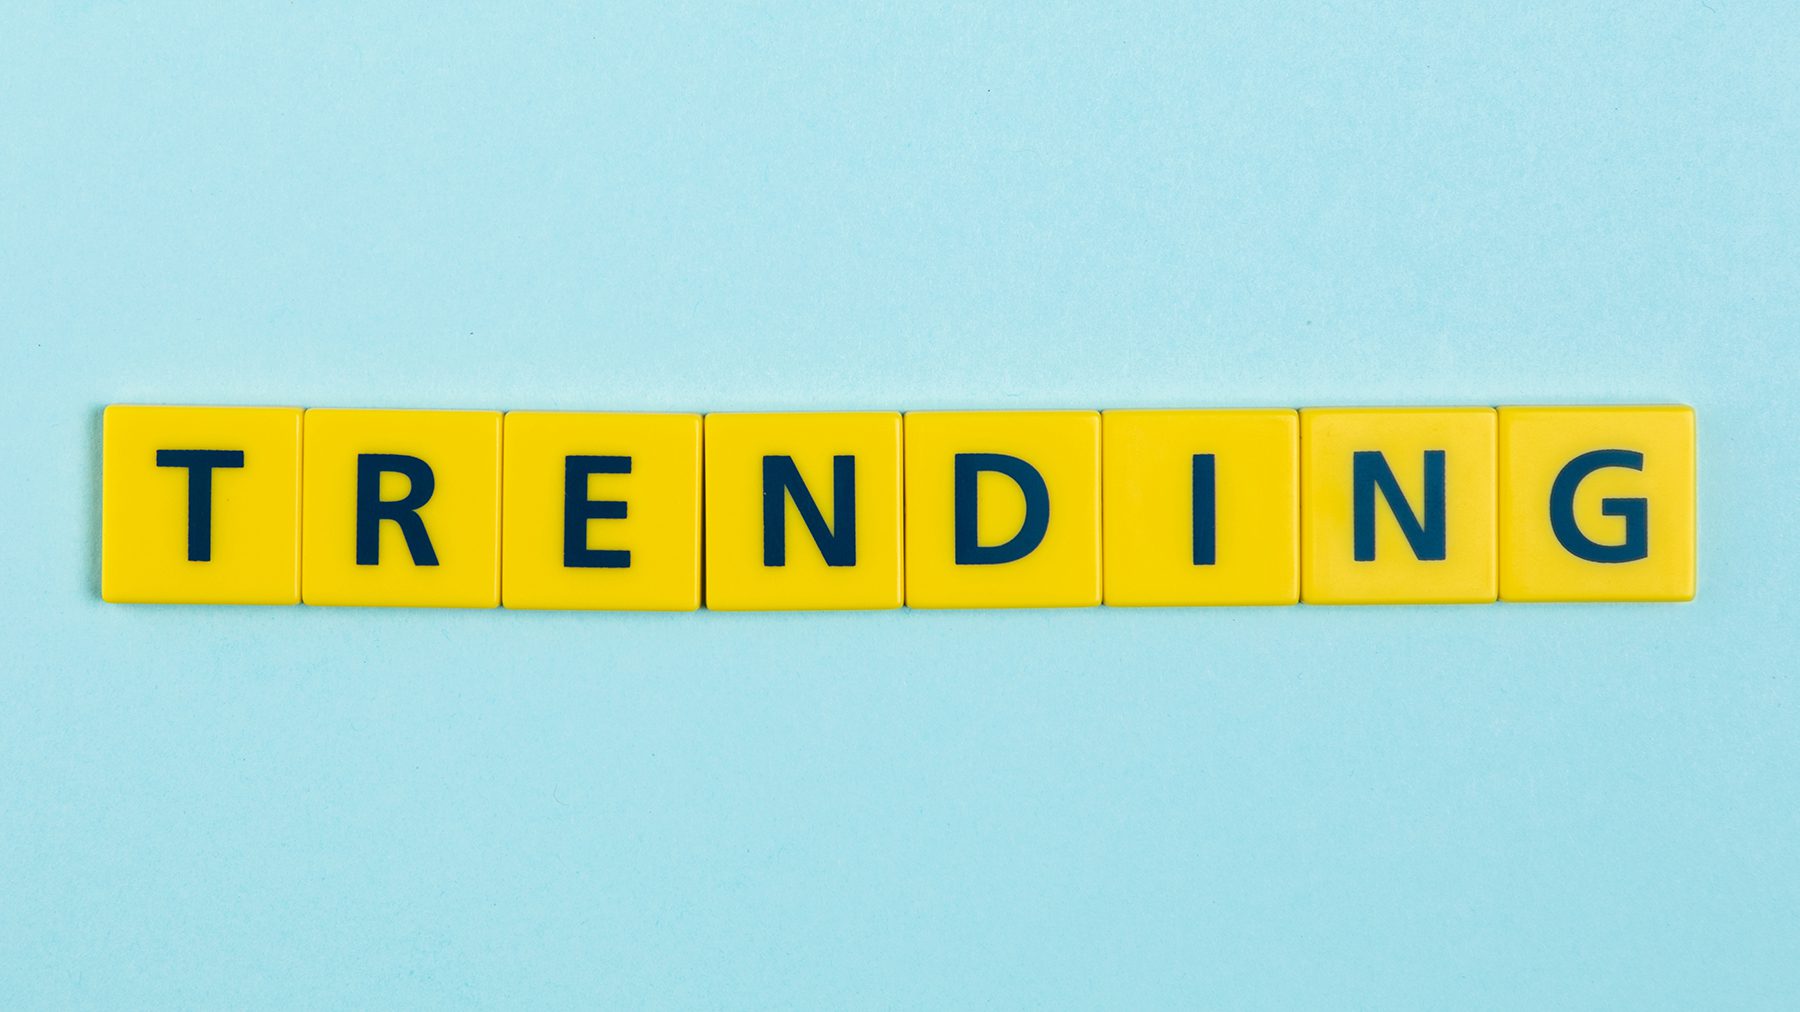 Industry Update: Latest Trends in Advertising Spend